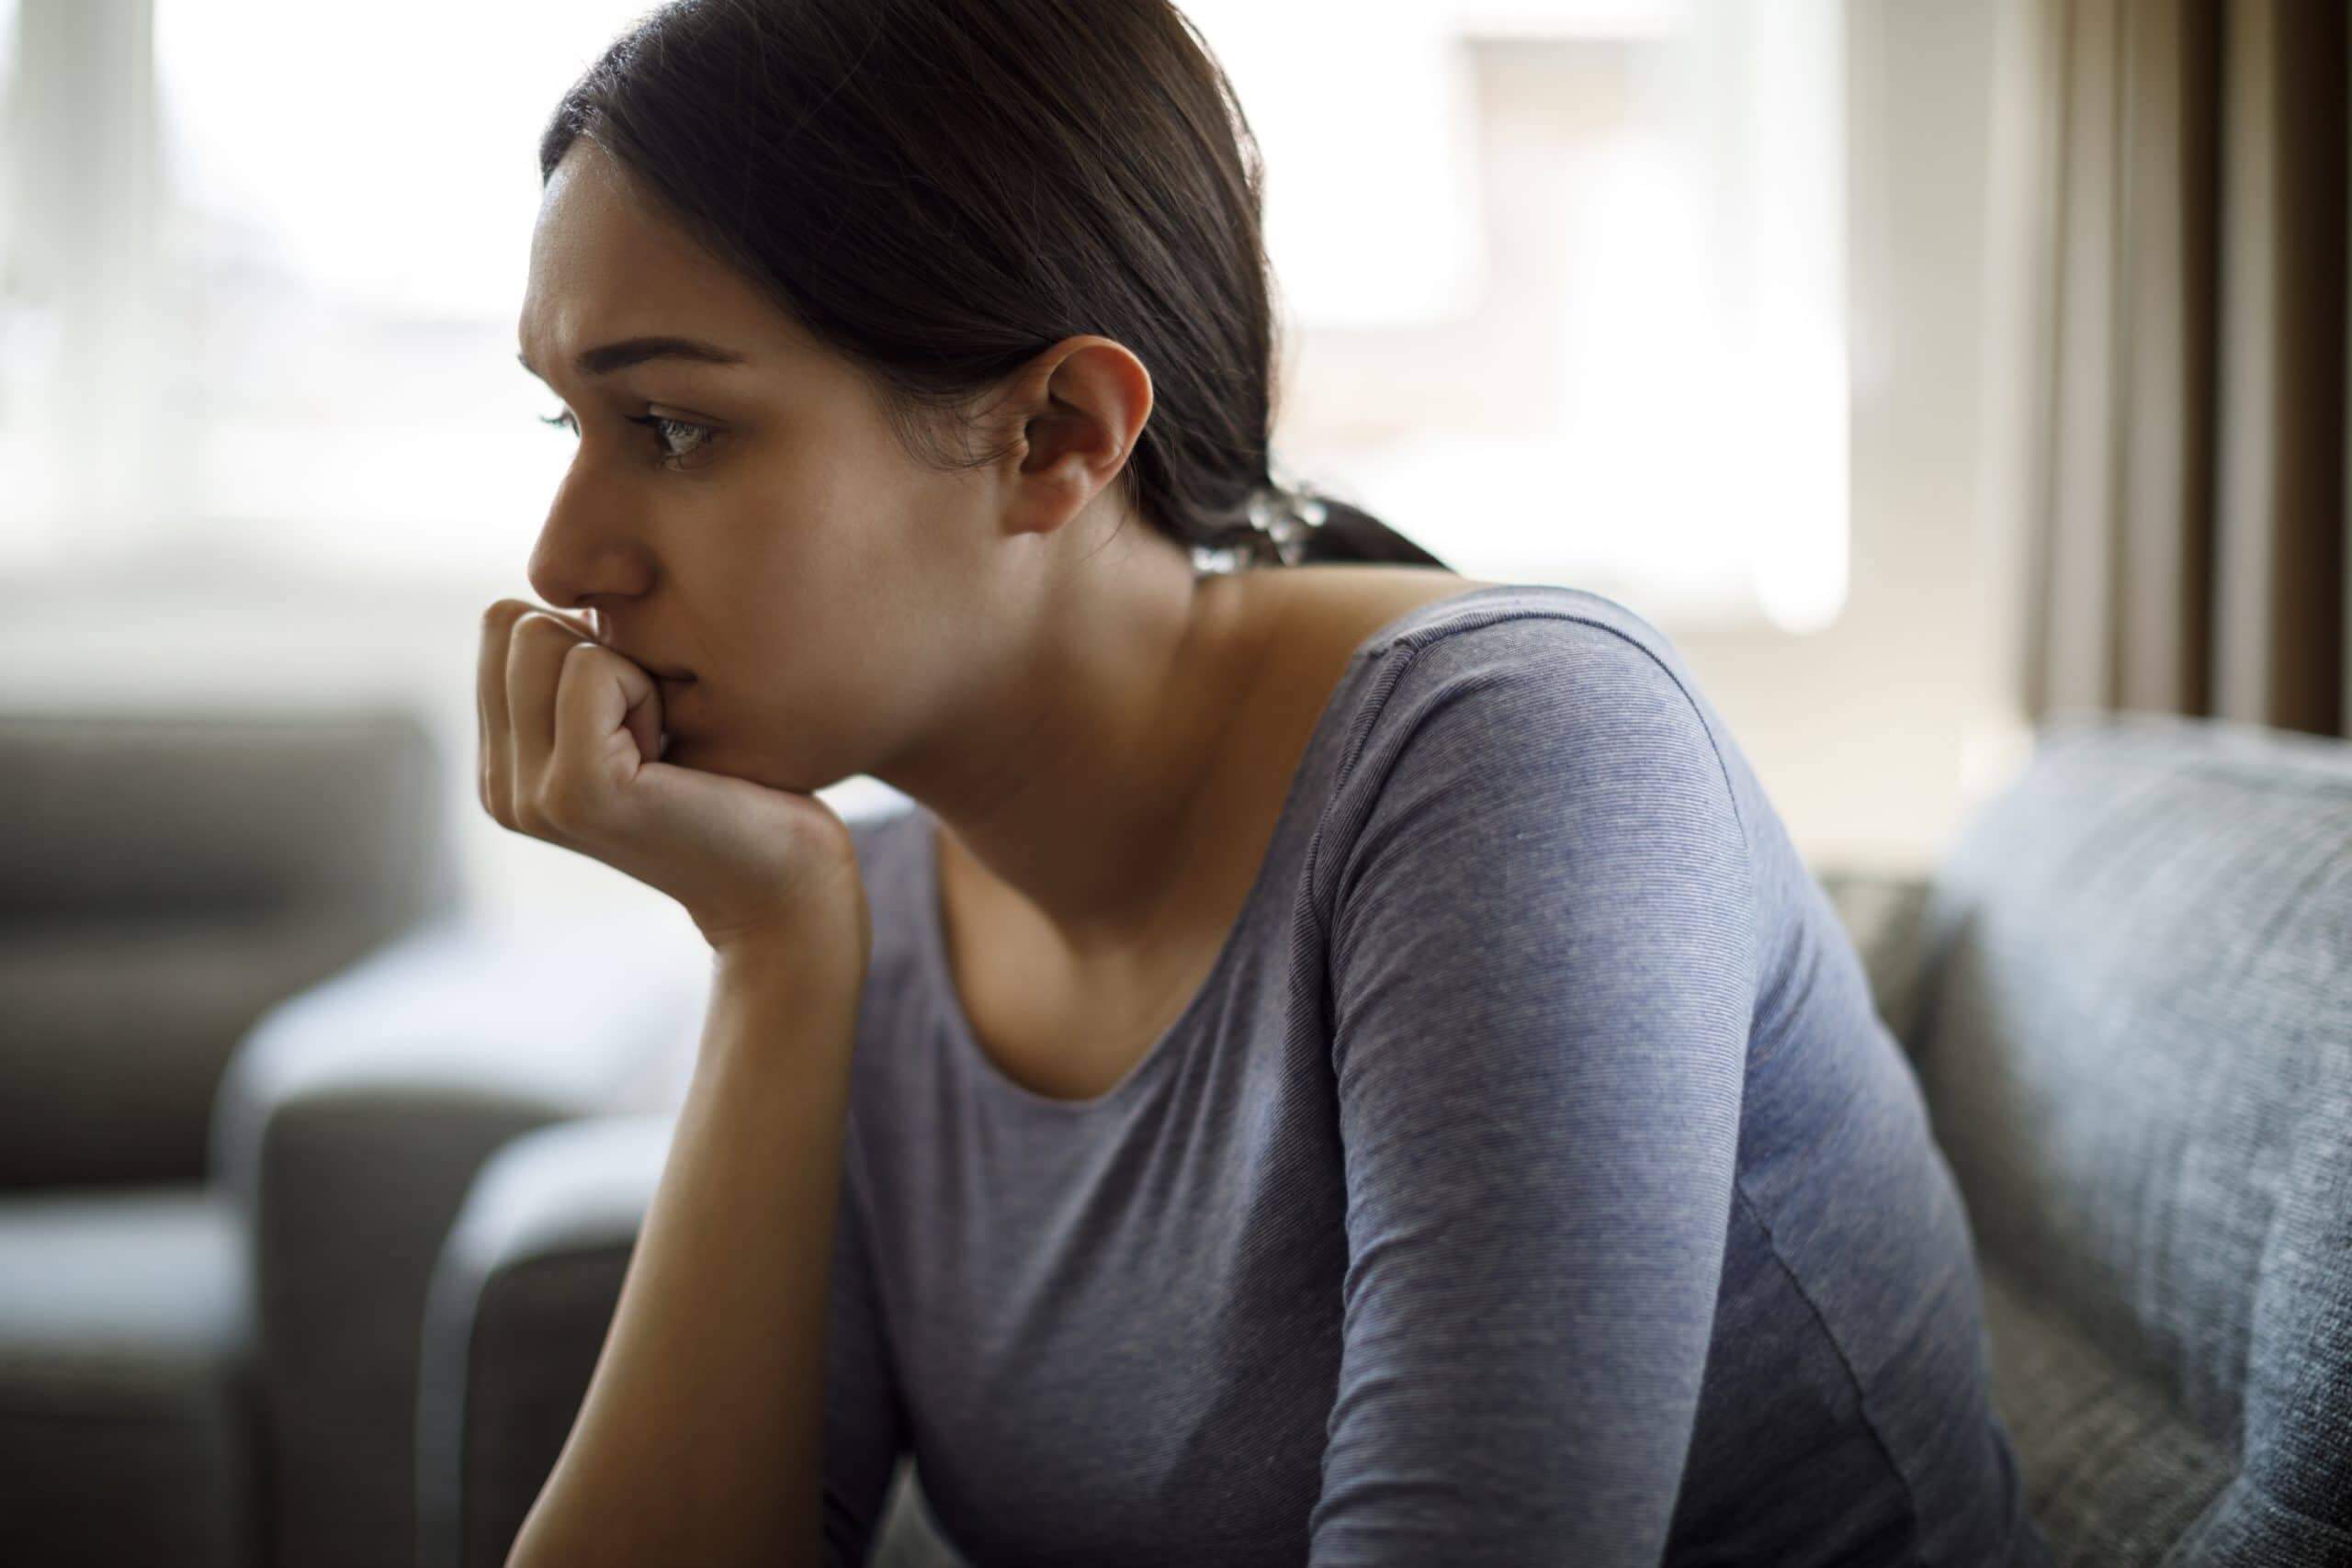 Woman struggling with post-pandemic anxiety